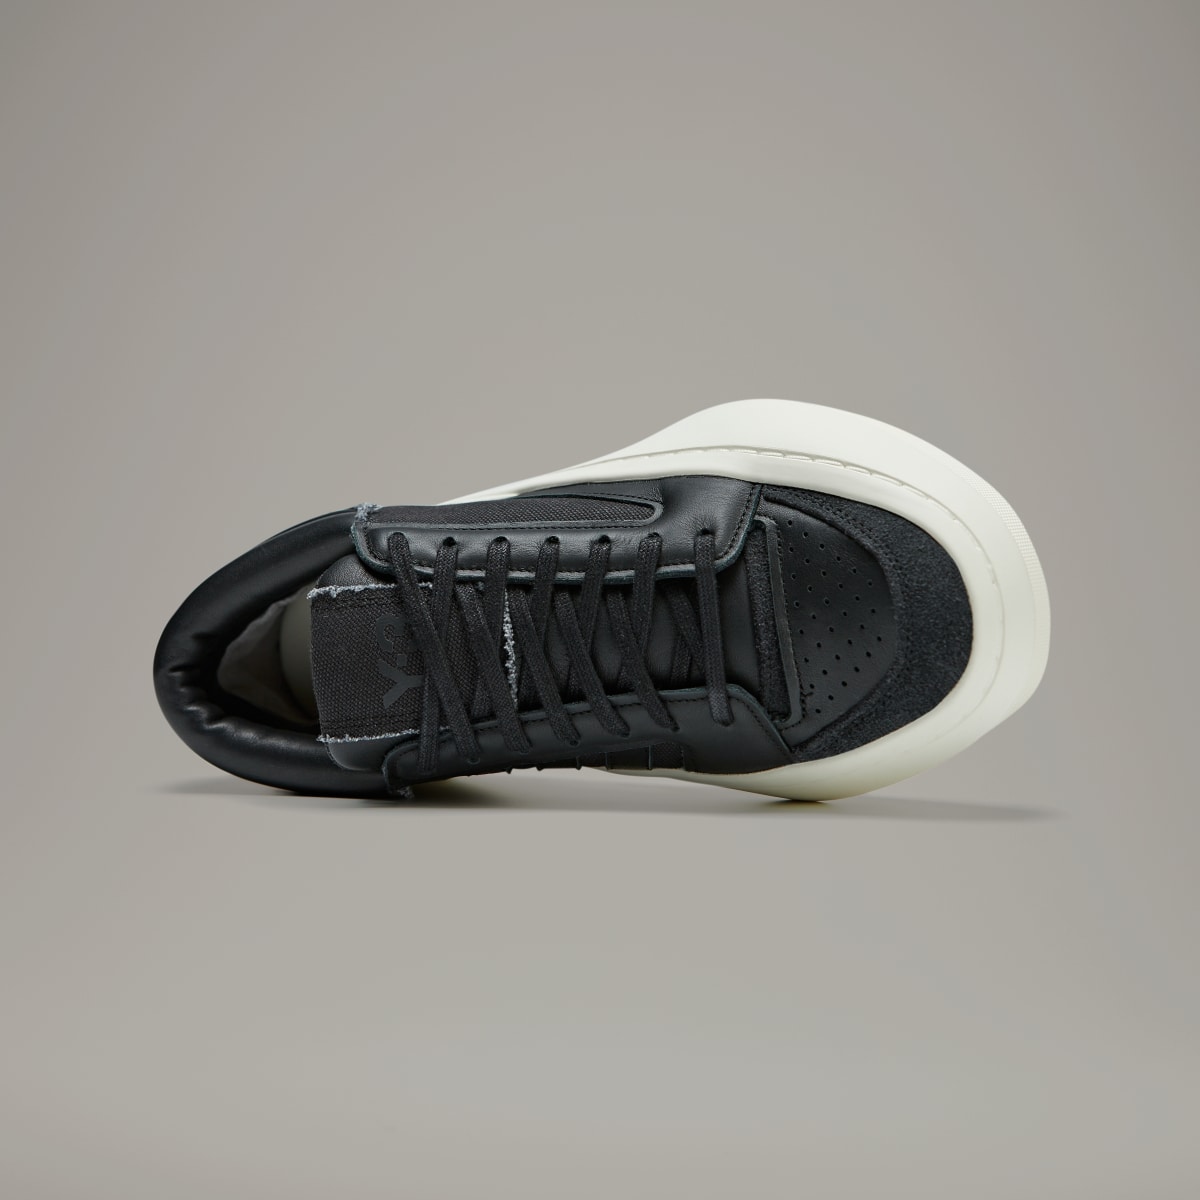 Adidas Y-3 Centennial Low Shoes. 4